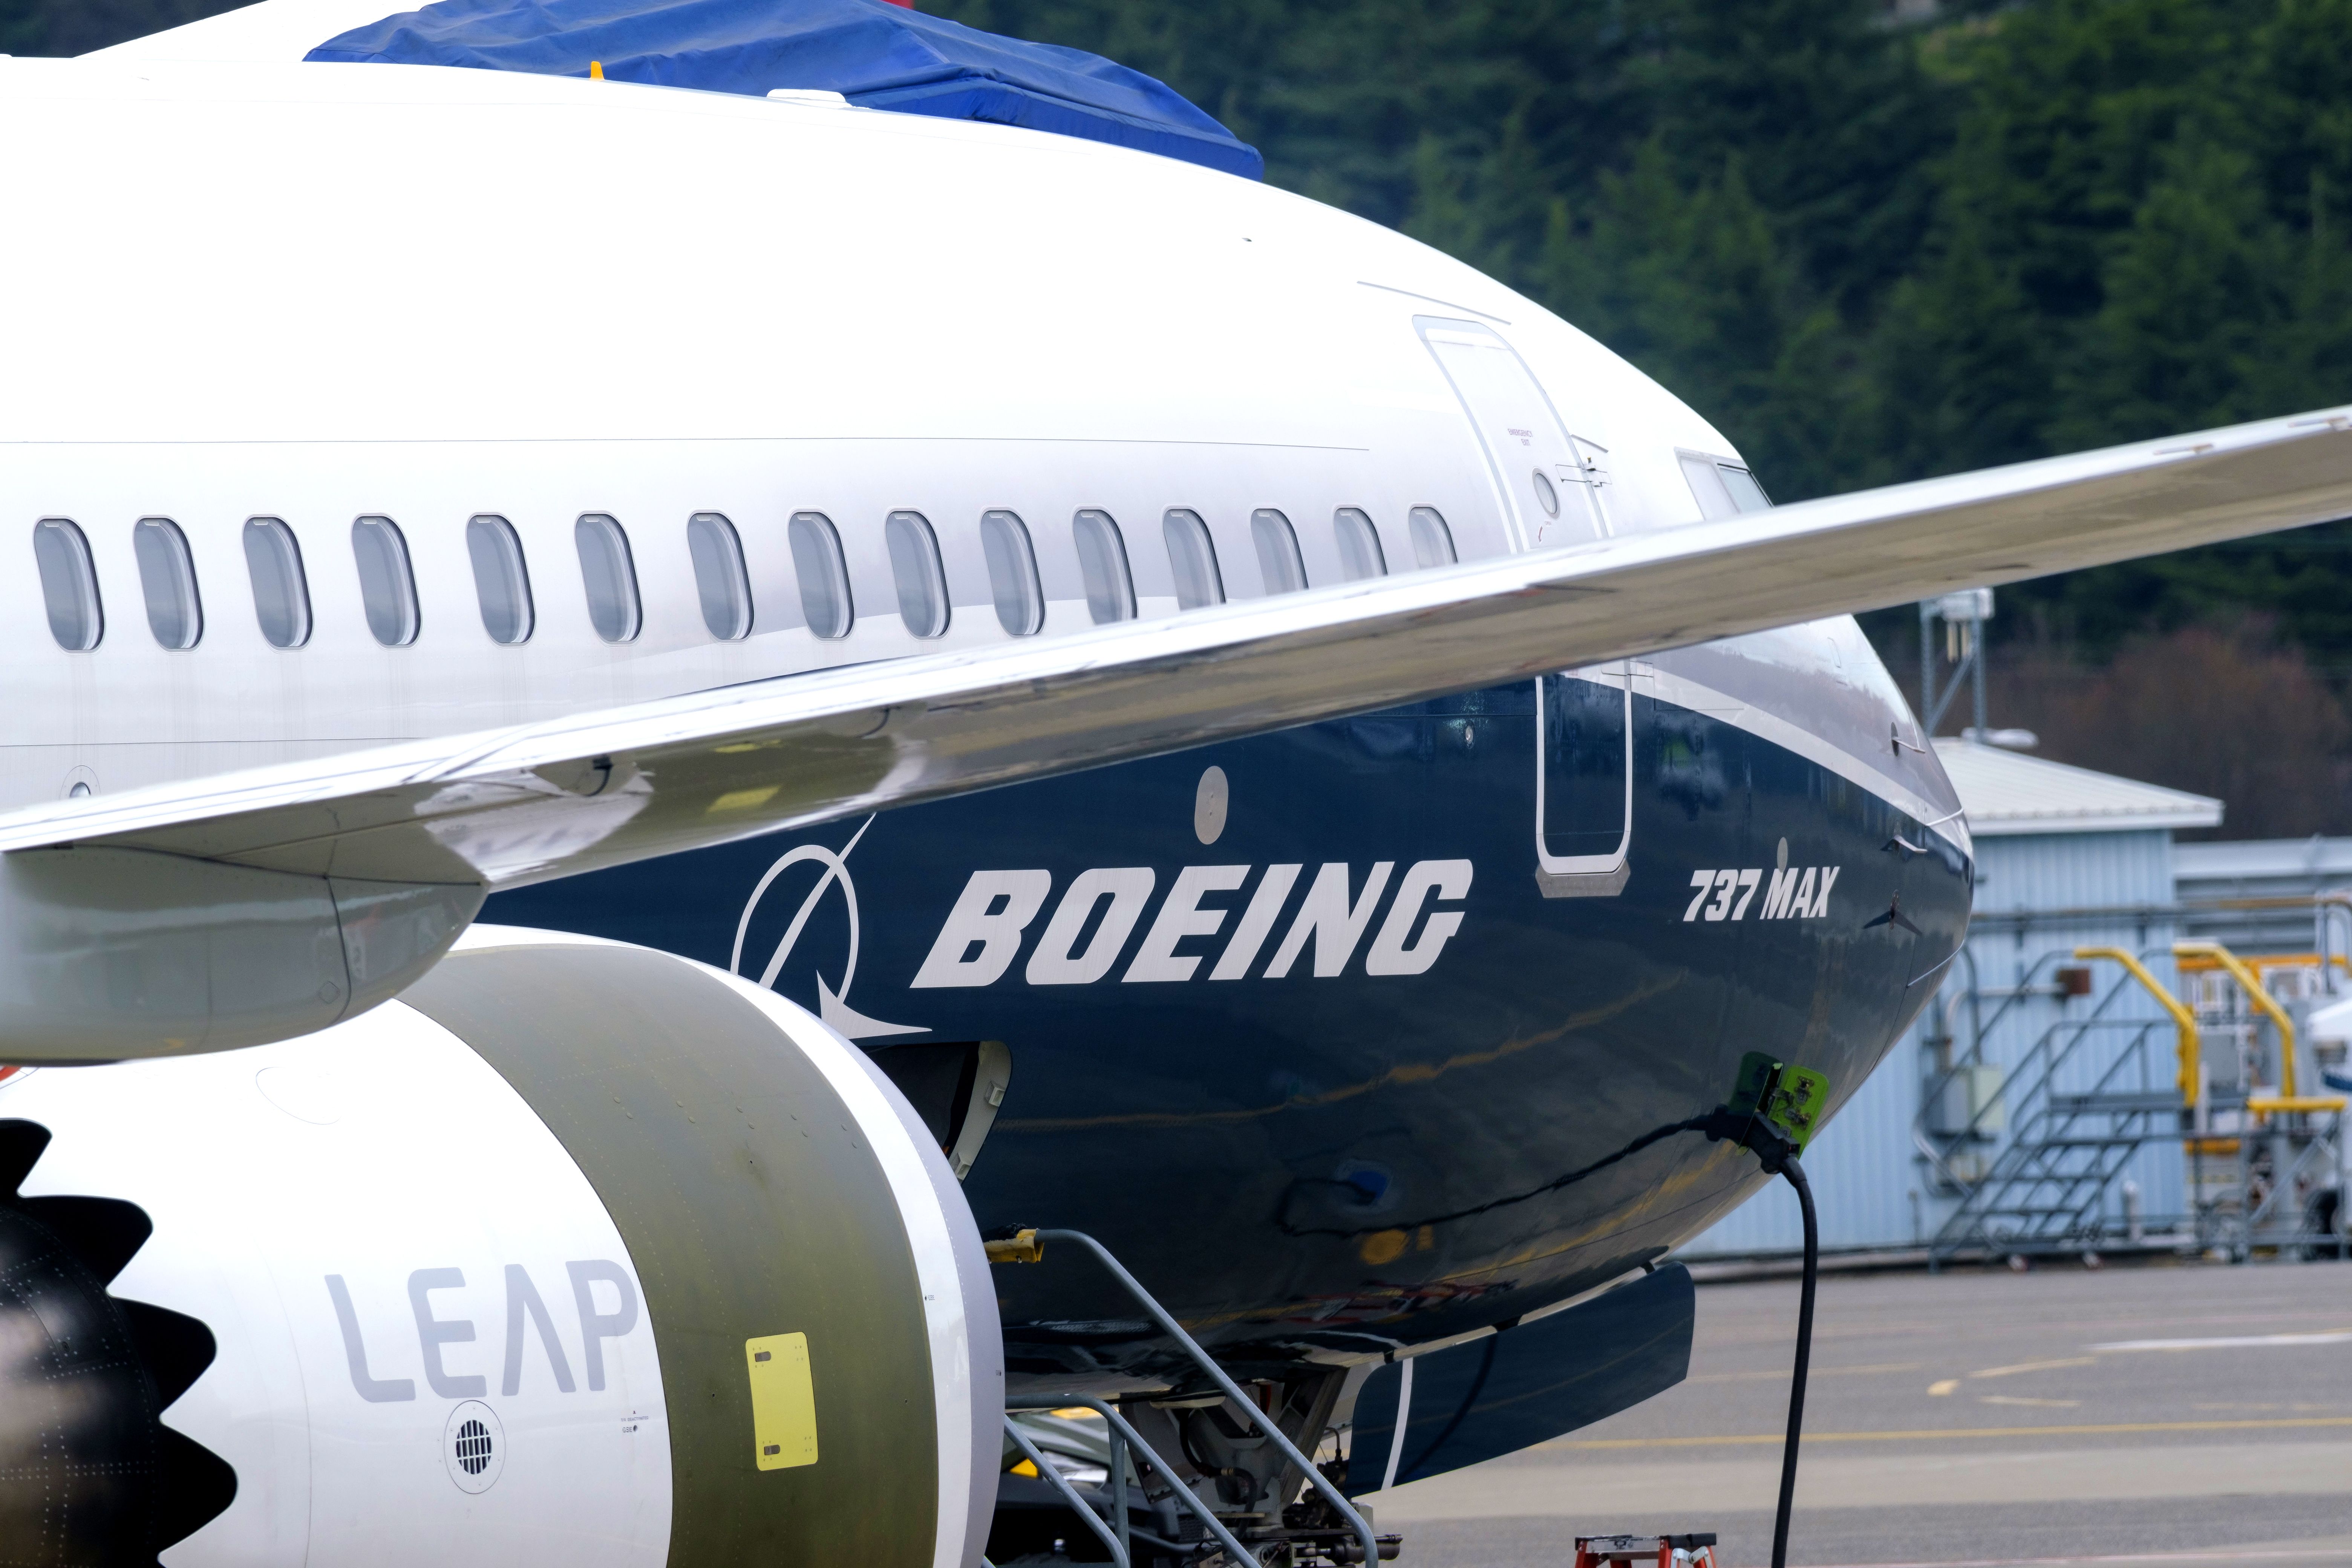 Boeing sets aside $100 million for families of 737 Max crash victims